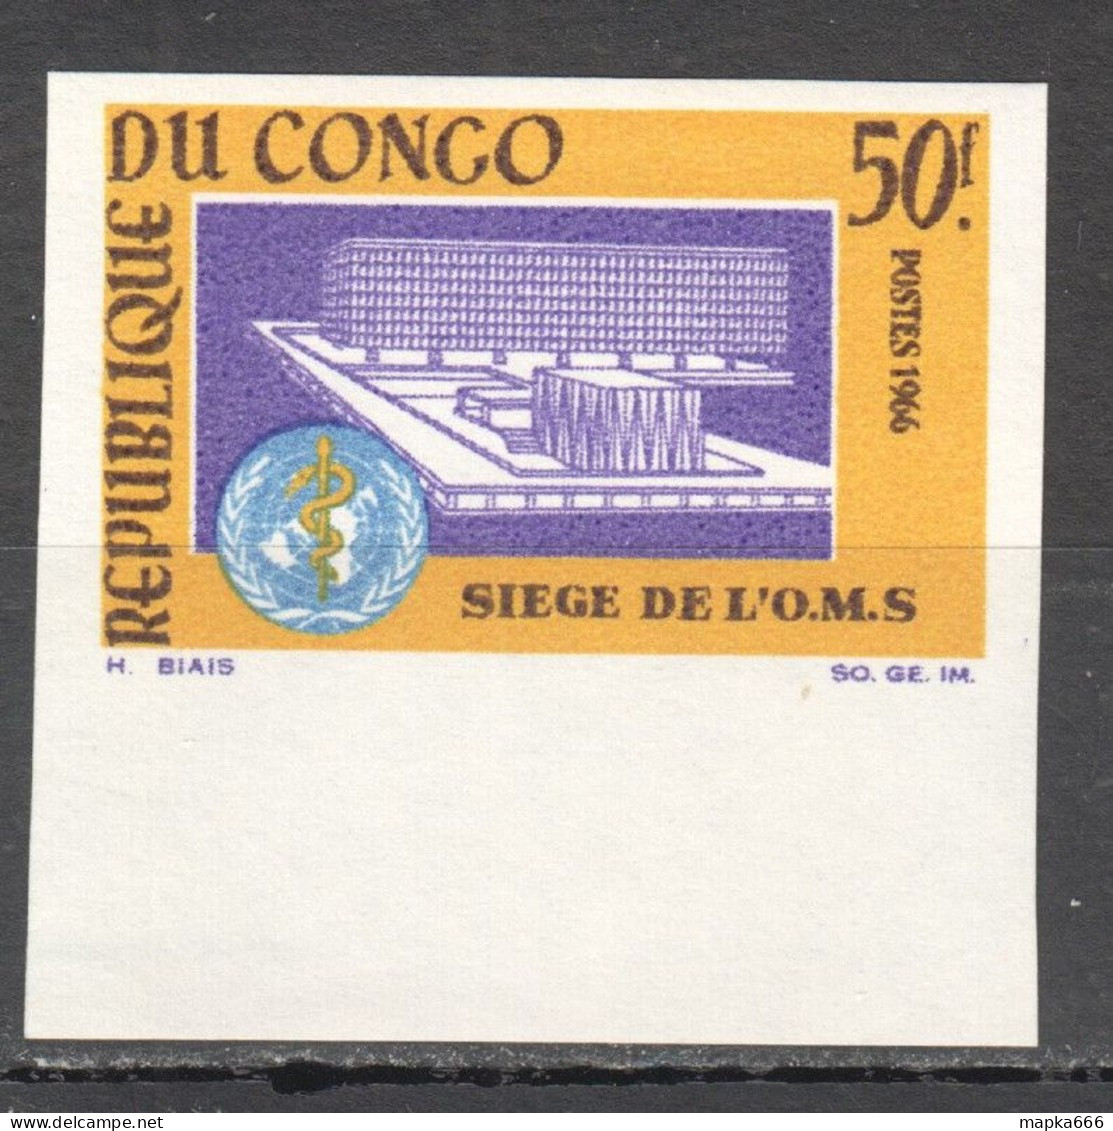 Fr425 Imperf 1966 Congo Who World Health Organization Michel #92 St Mnh - WHO